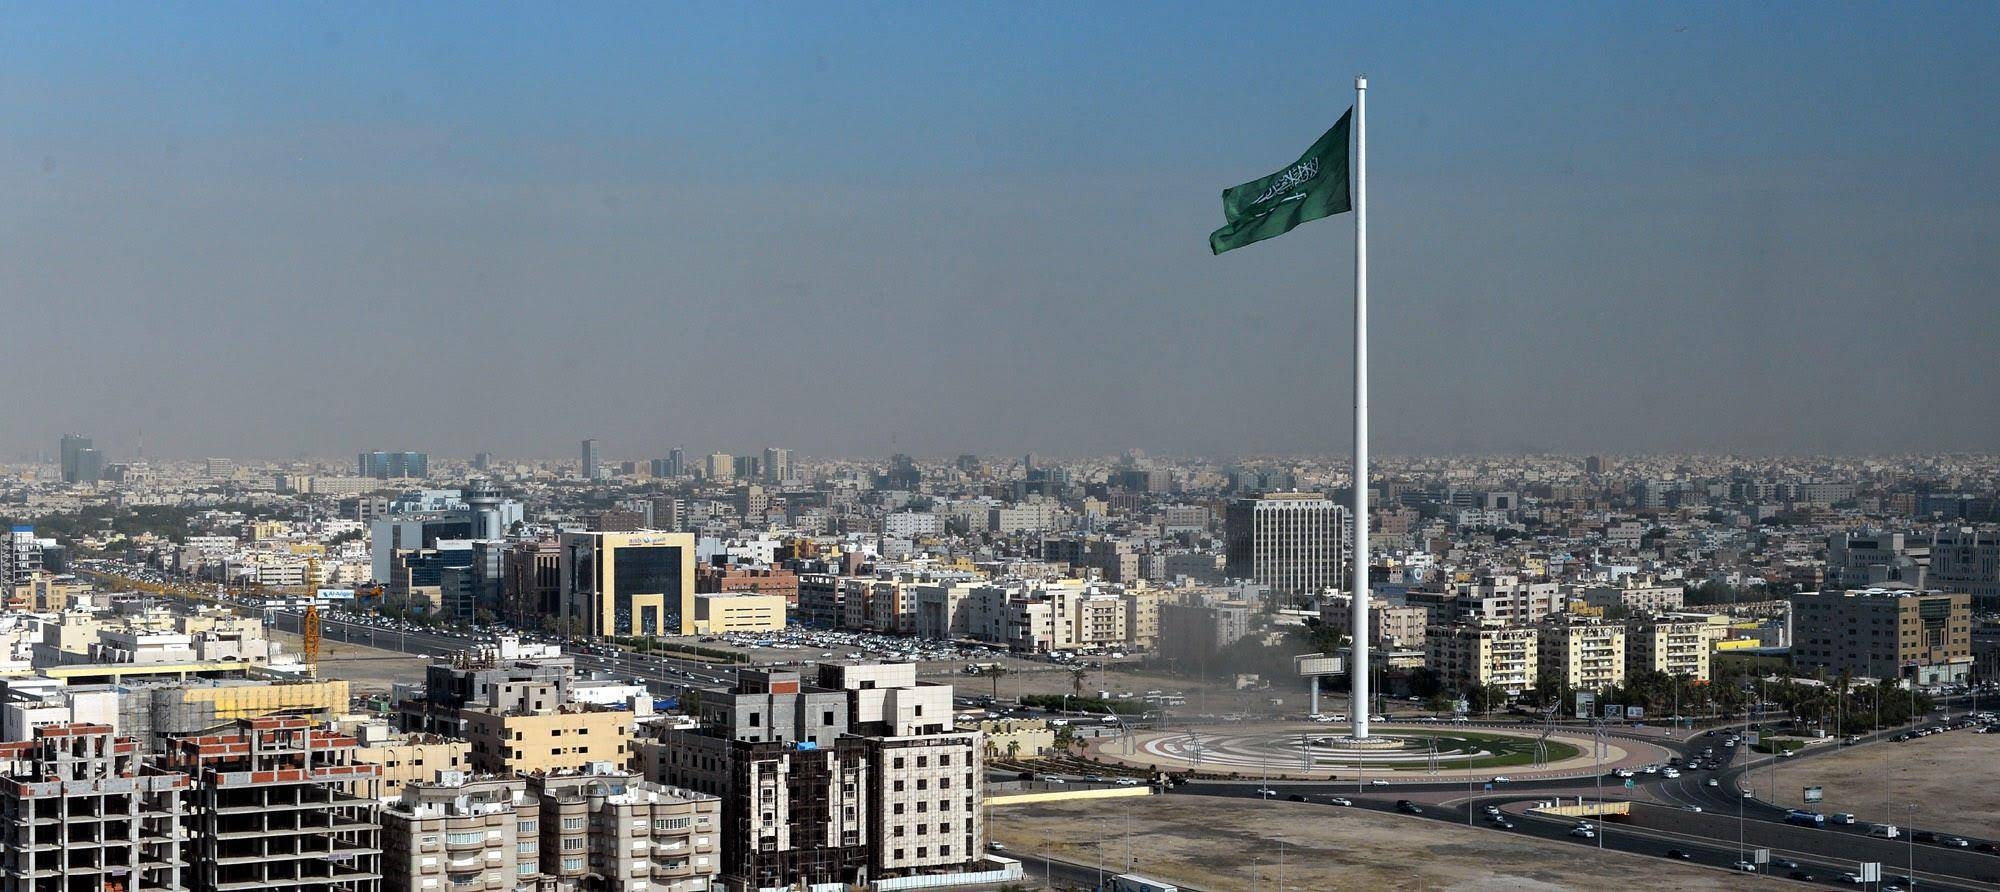 Saudi Arabia ranks second in global competitiveness annual report for 2020